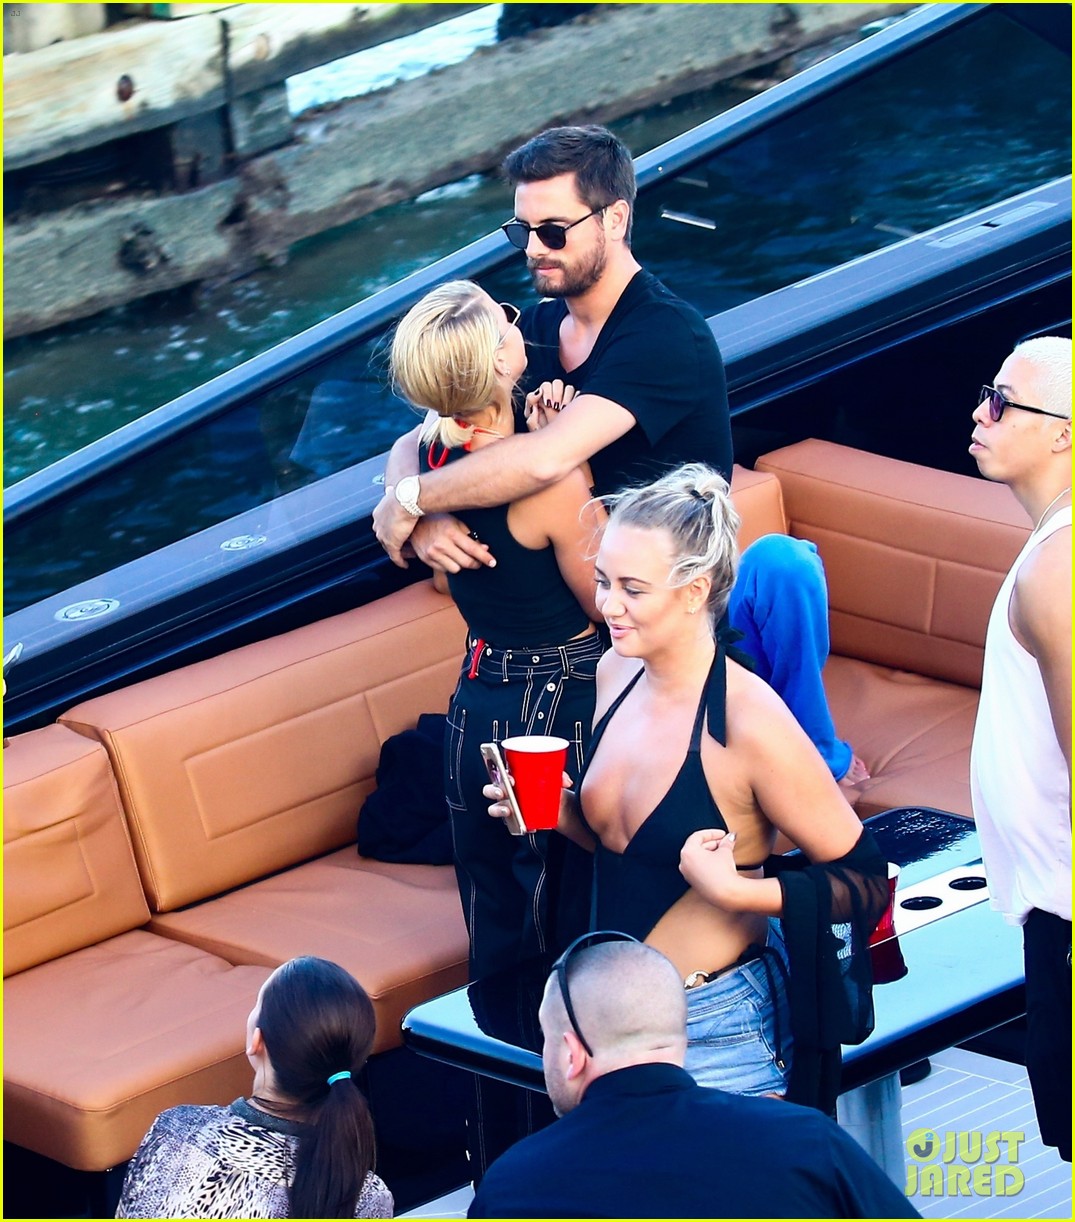 scott disick and sofia richie flaunt pda on a boat with friends2 19